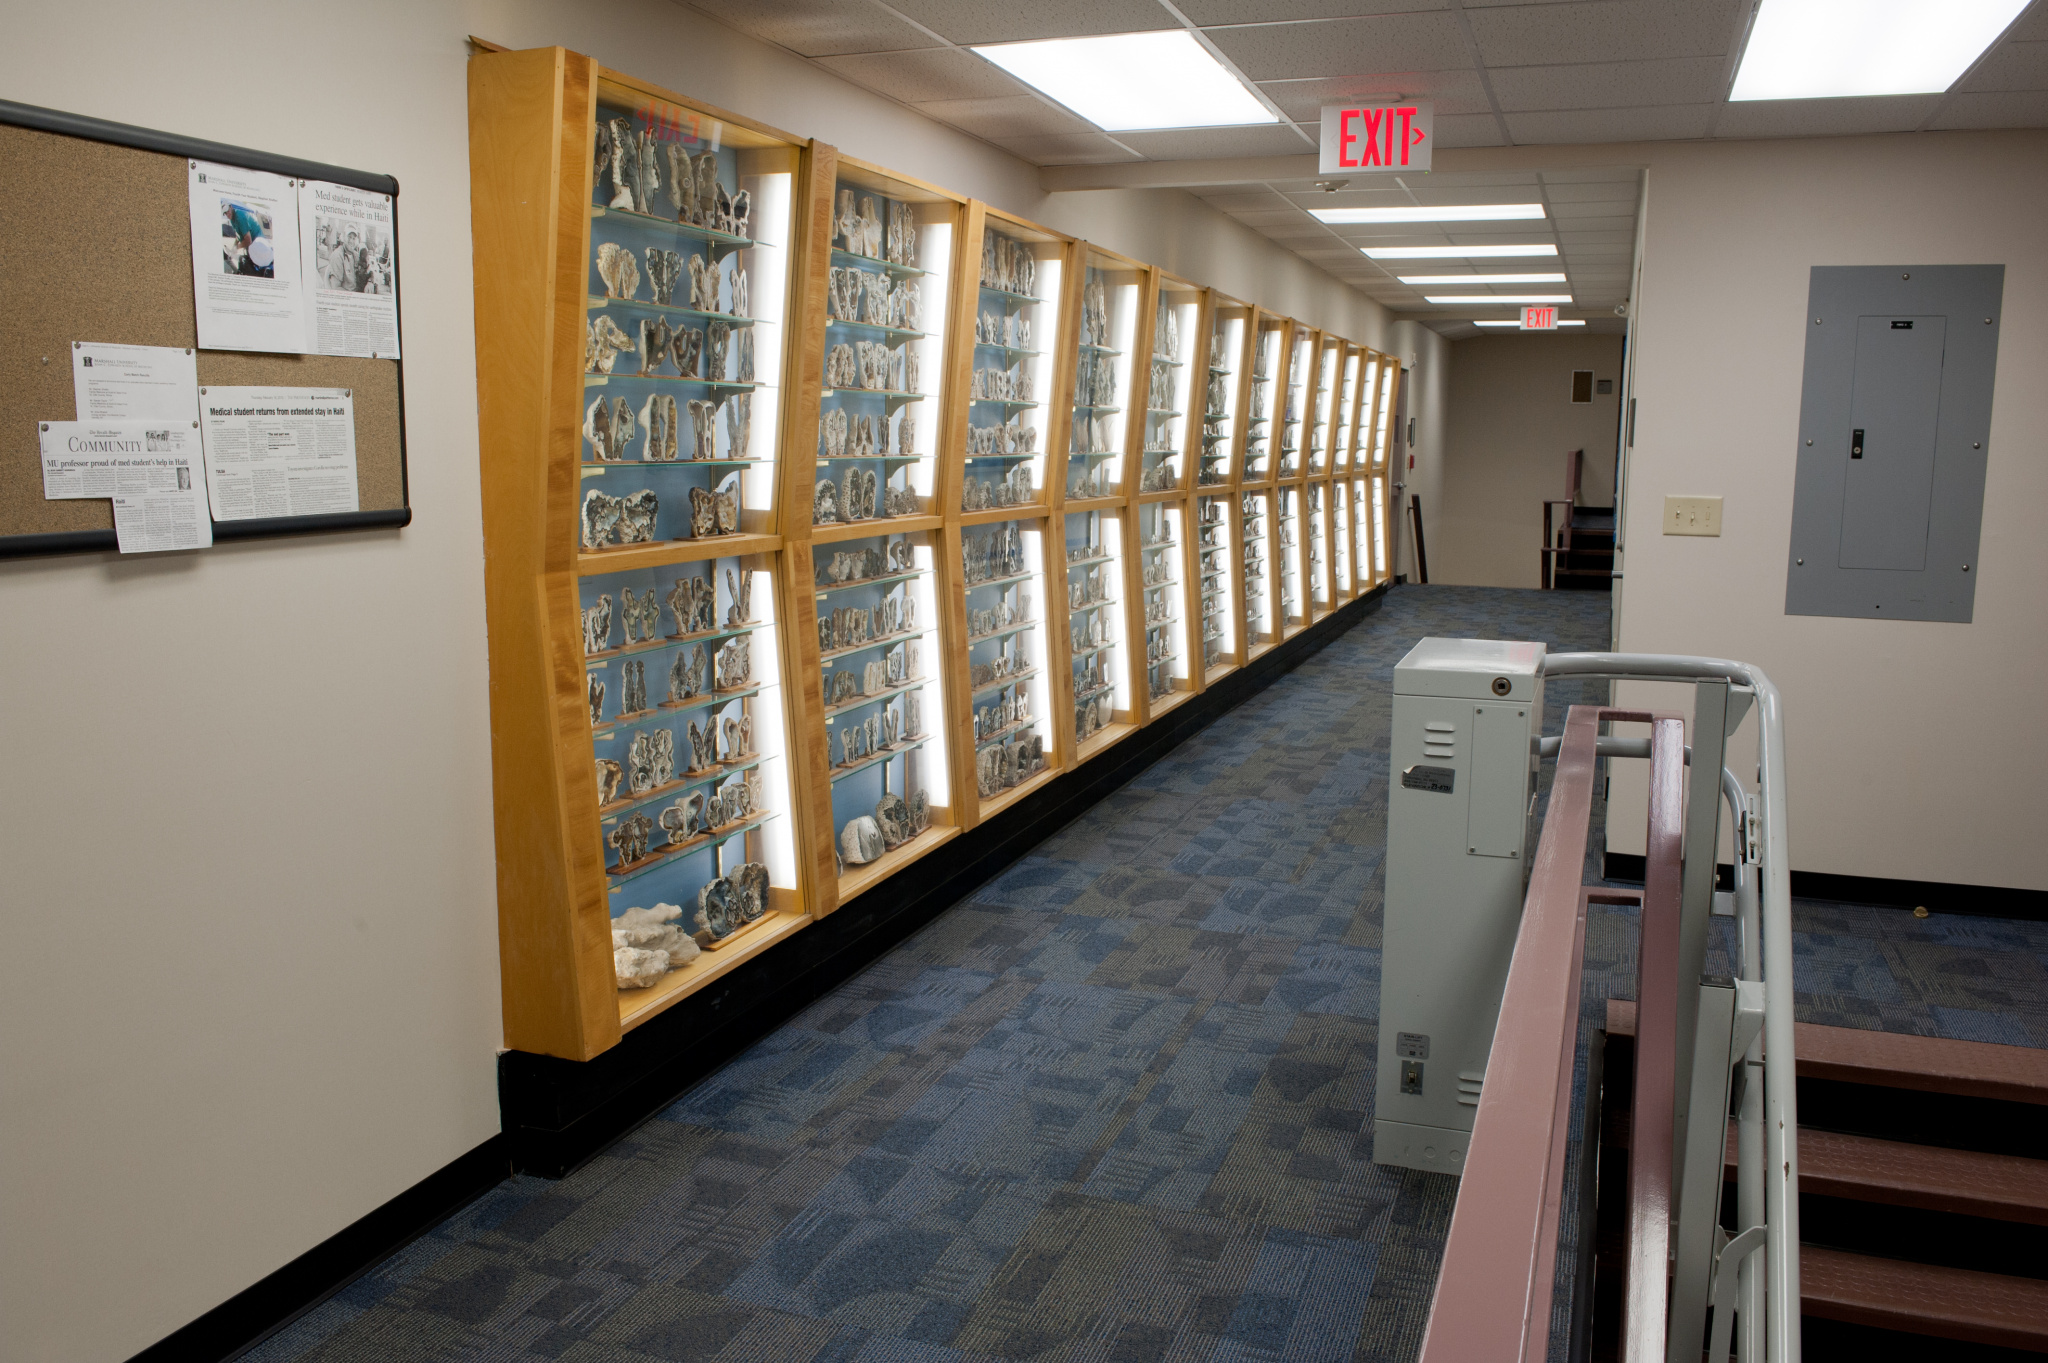 The hallways of the science building are lined with collections from donors (Photo by Dan Calnon)